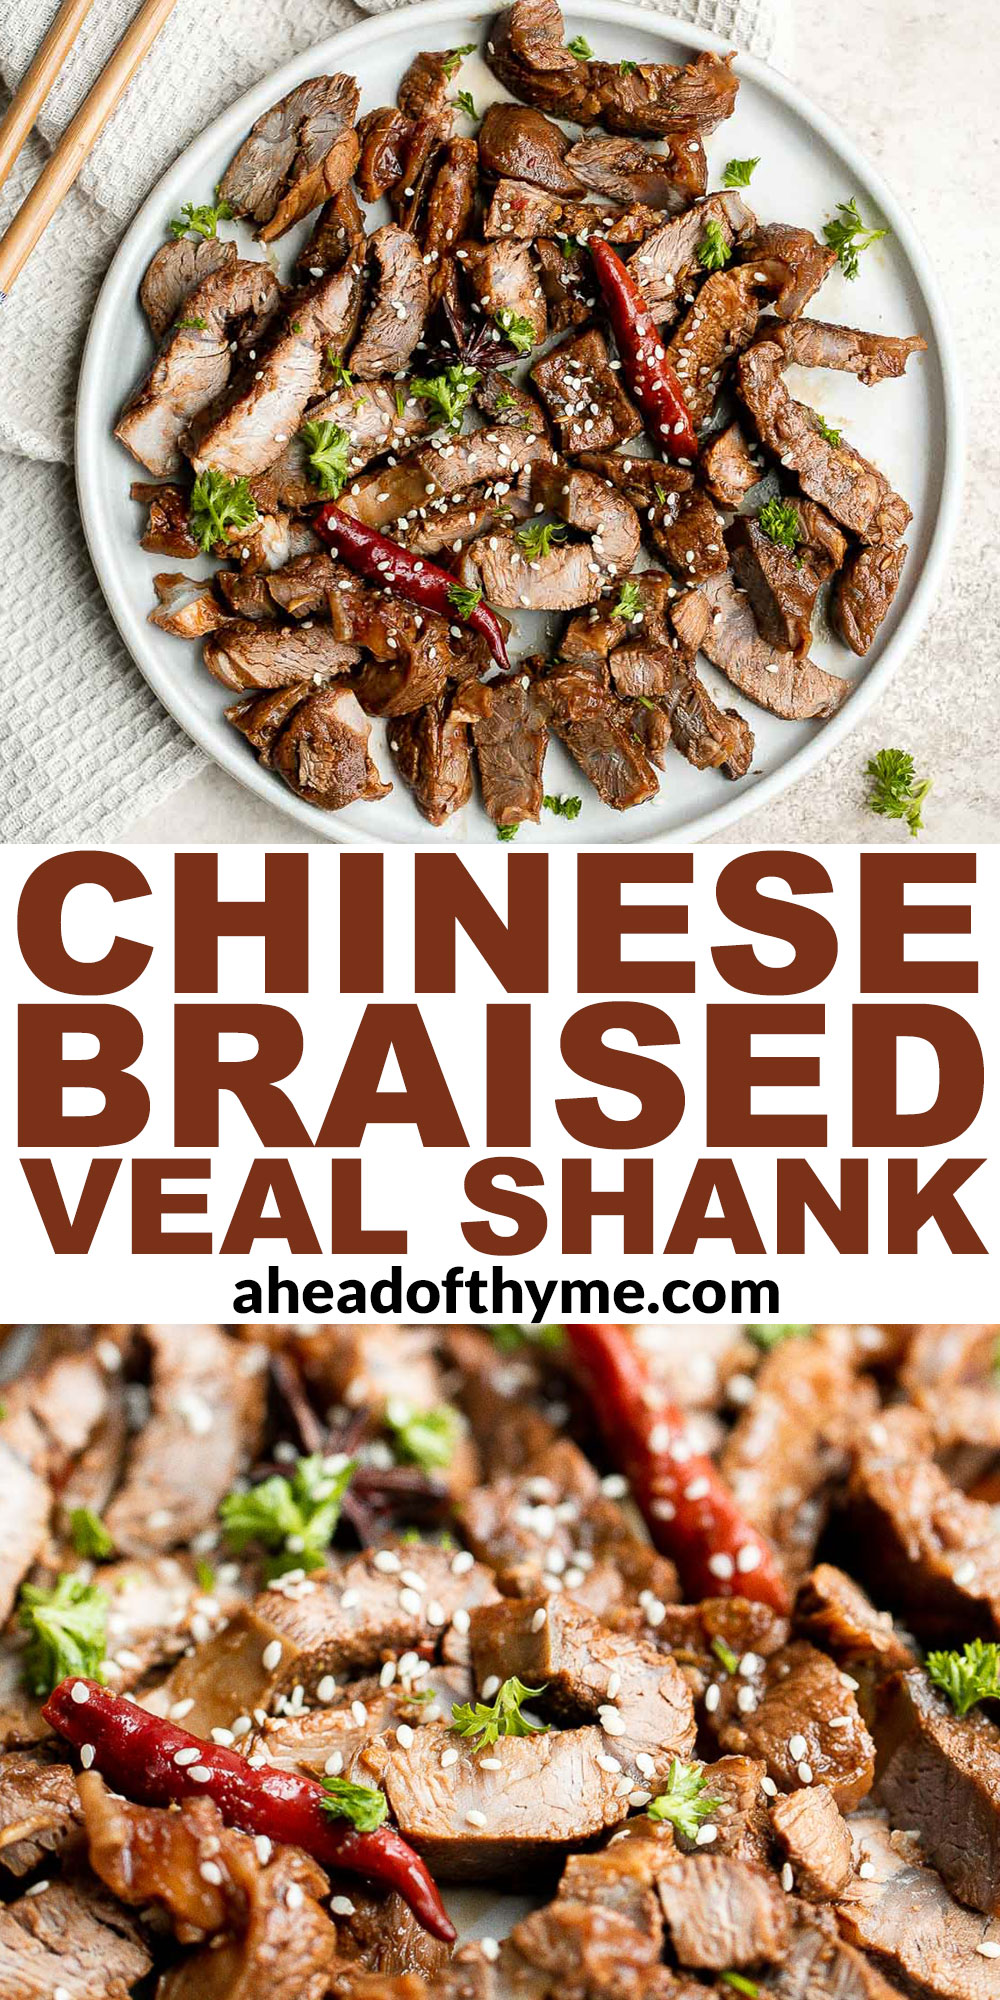 Chinese Braised Veal Shank